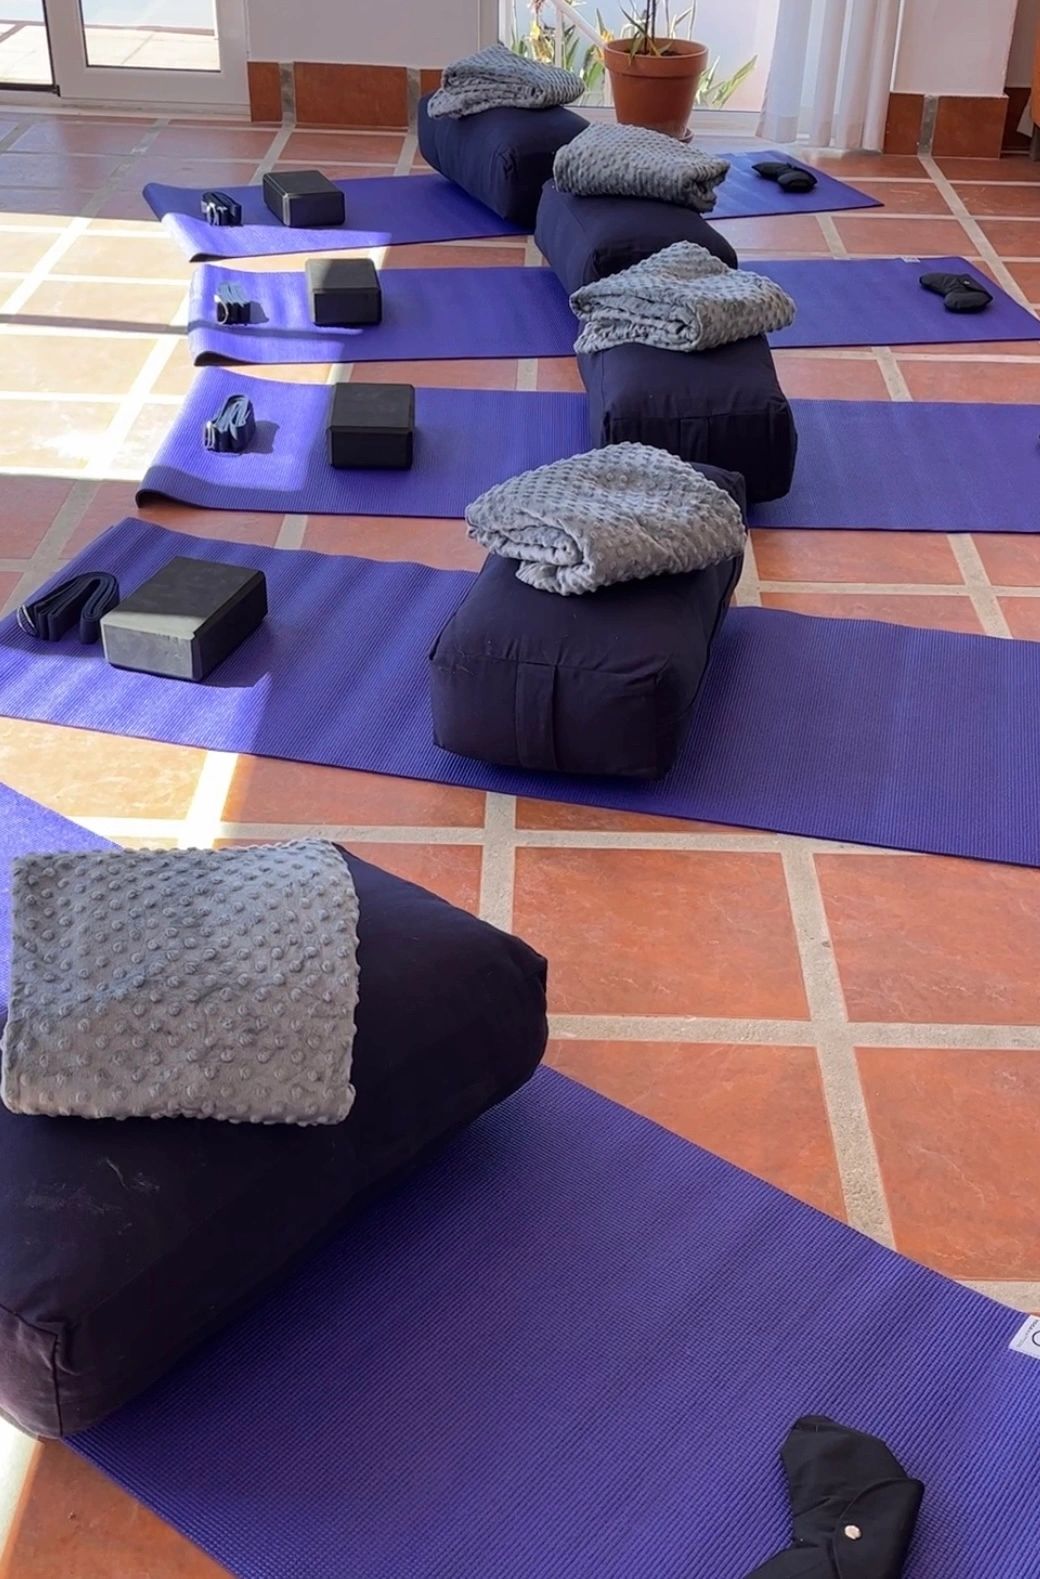 Rent 30 Yoga Mats in London (rent for £150.00 / day, £128.57 / week)